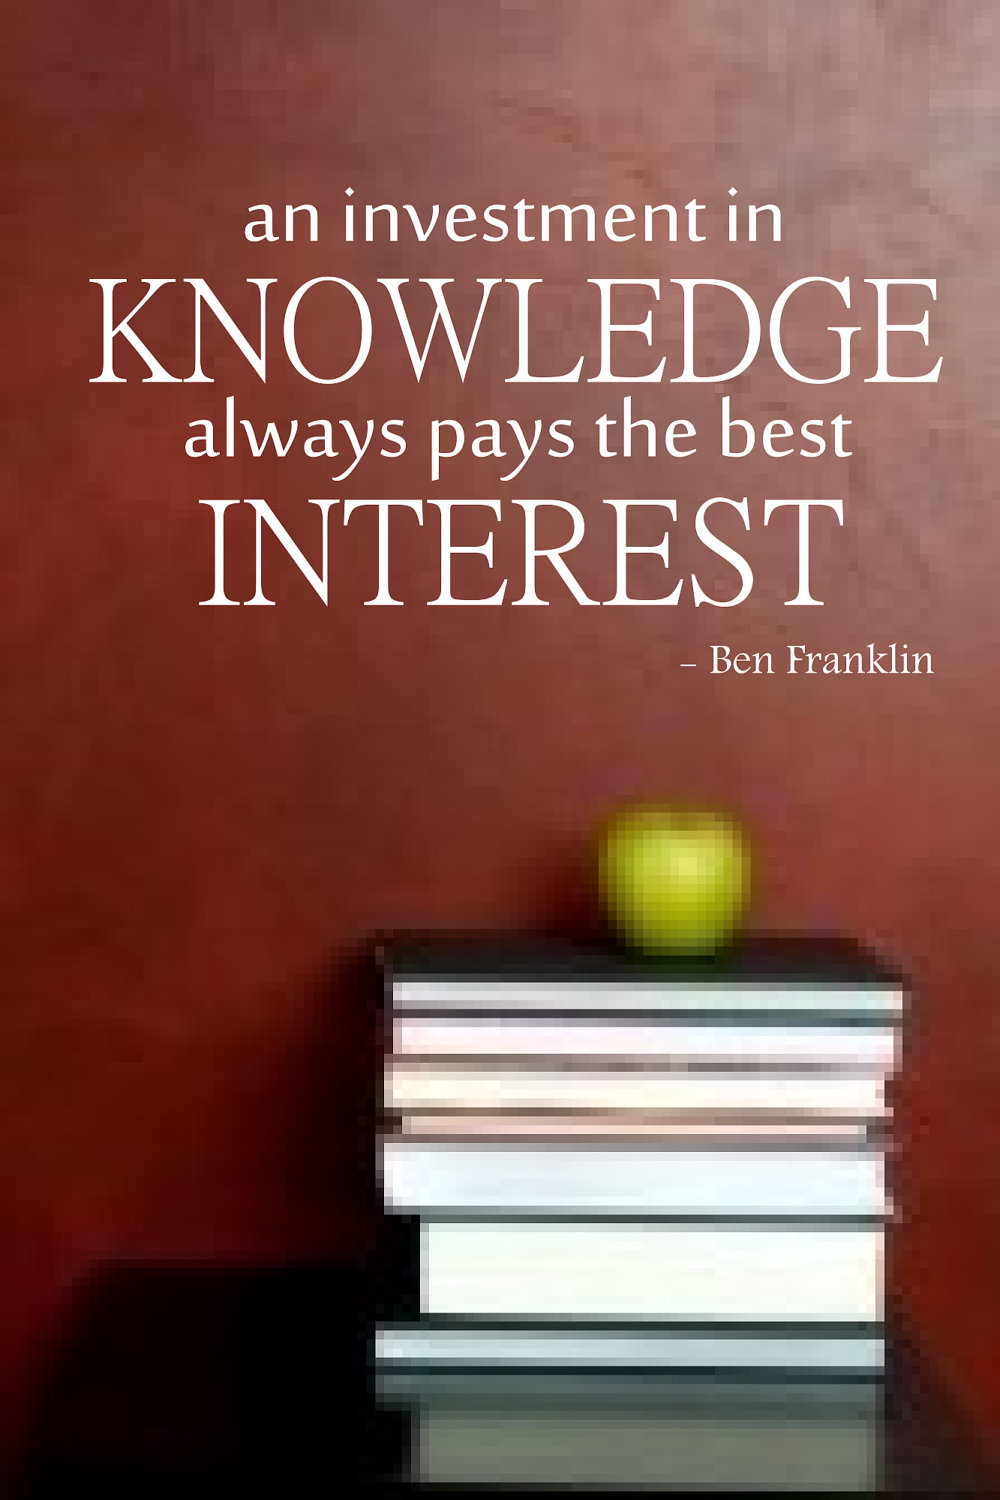 Quotes About Education Importance. QuotesGram